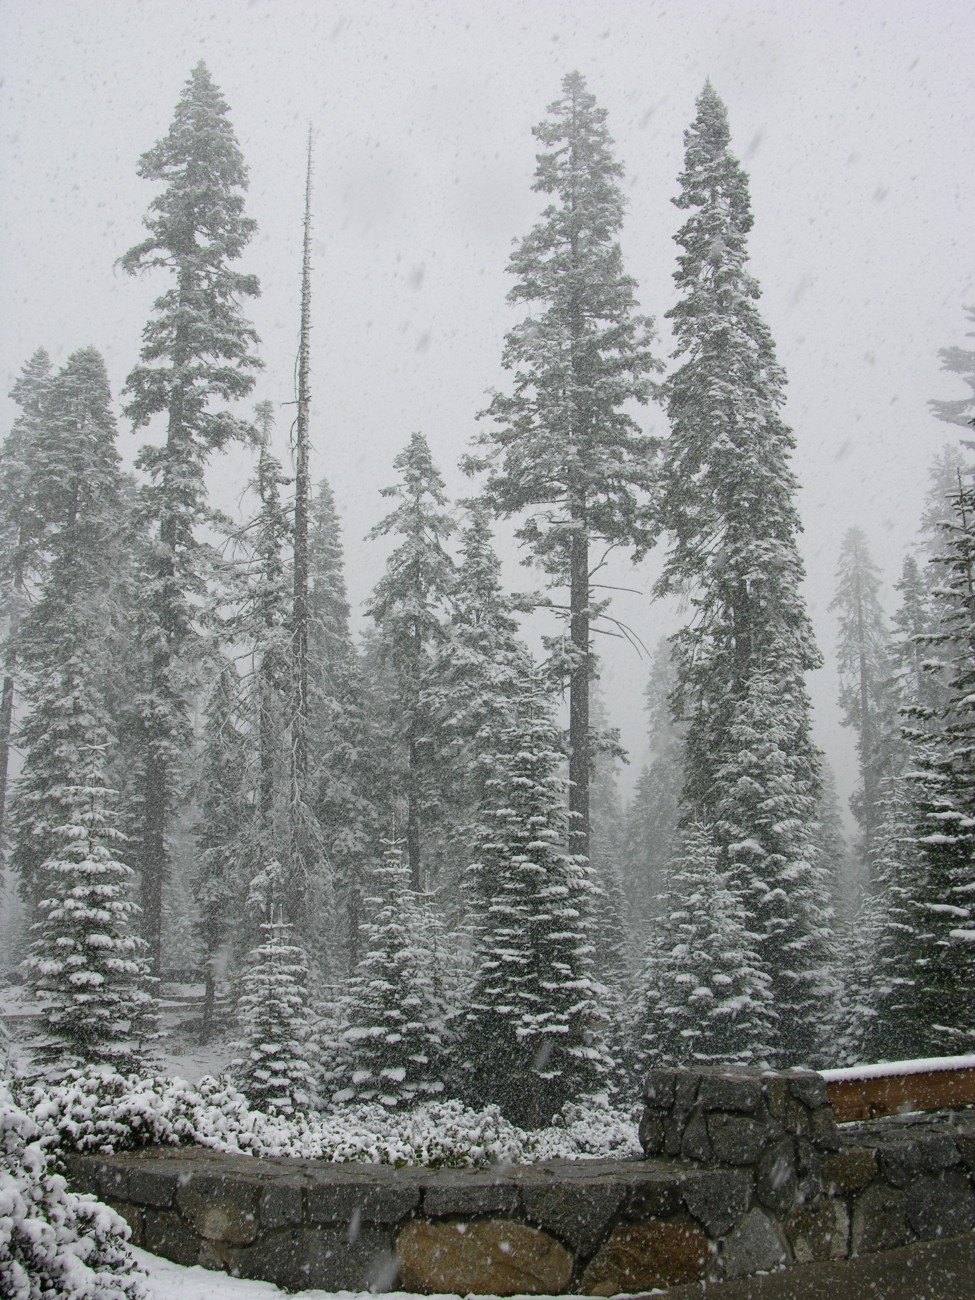 Snow in Sequoia National Park